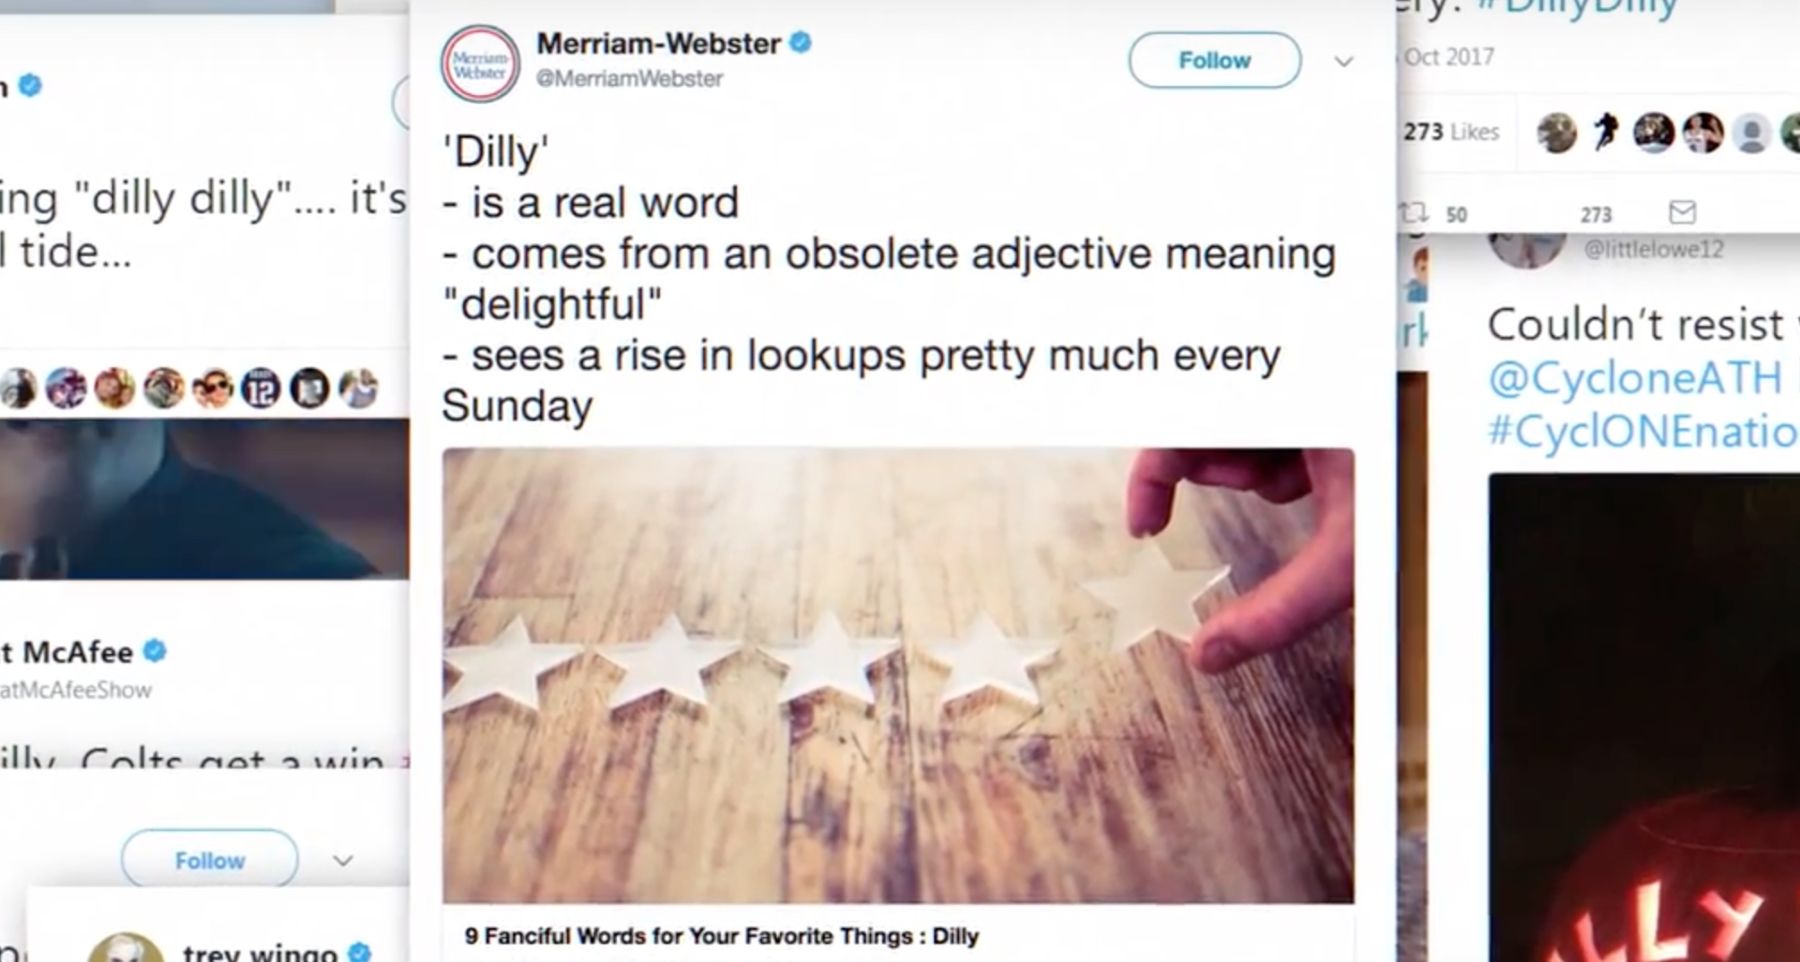 Dillydilly-merriamwebster